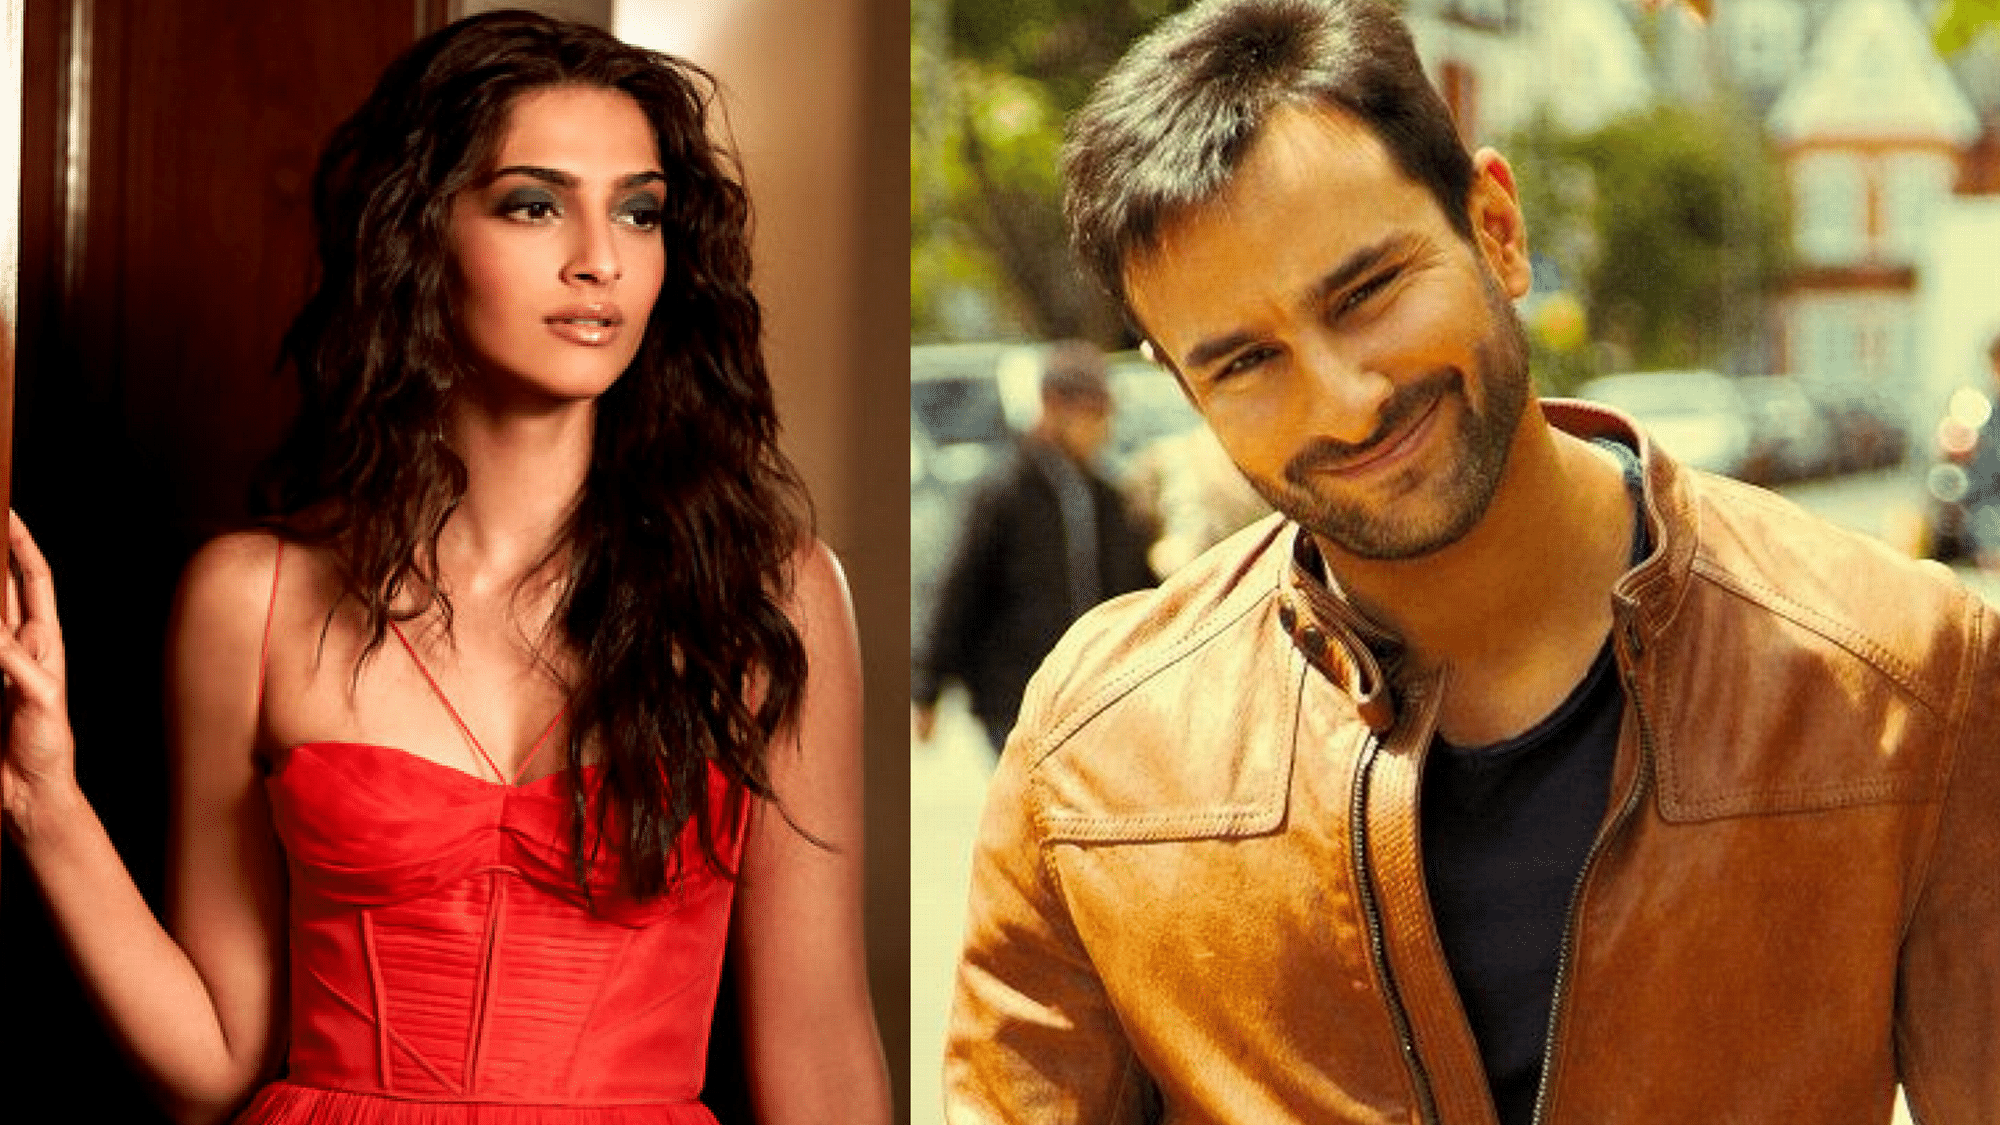 Sonam Kapoor and Saif Ali Khan might actually be more suited for the role of a&nbsp;producer